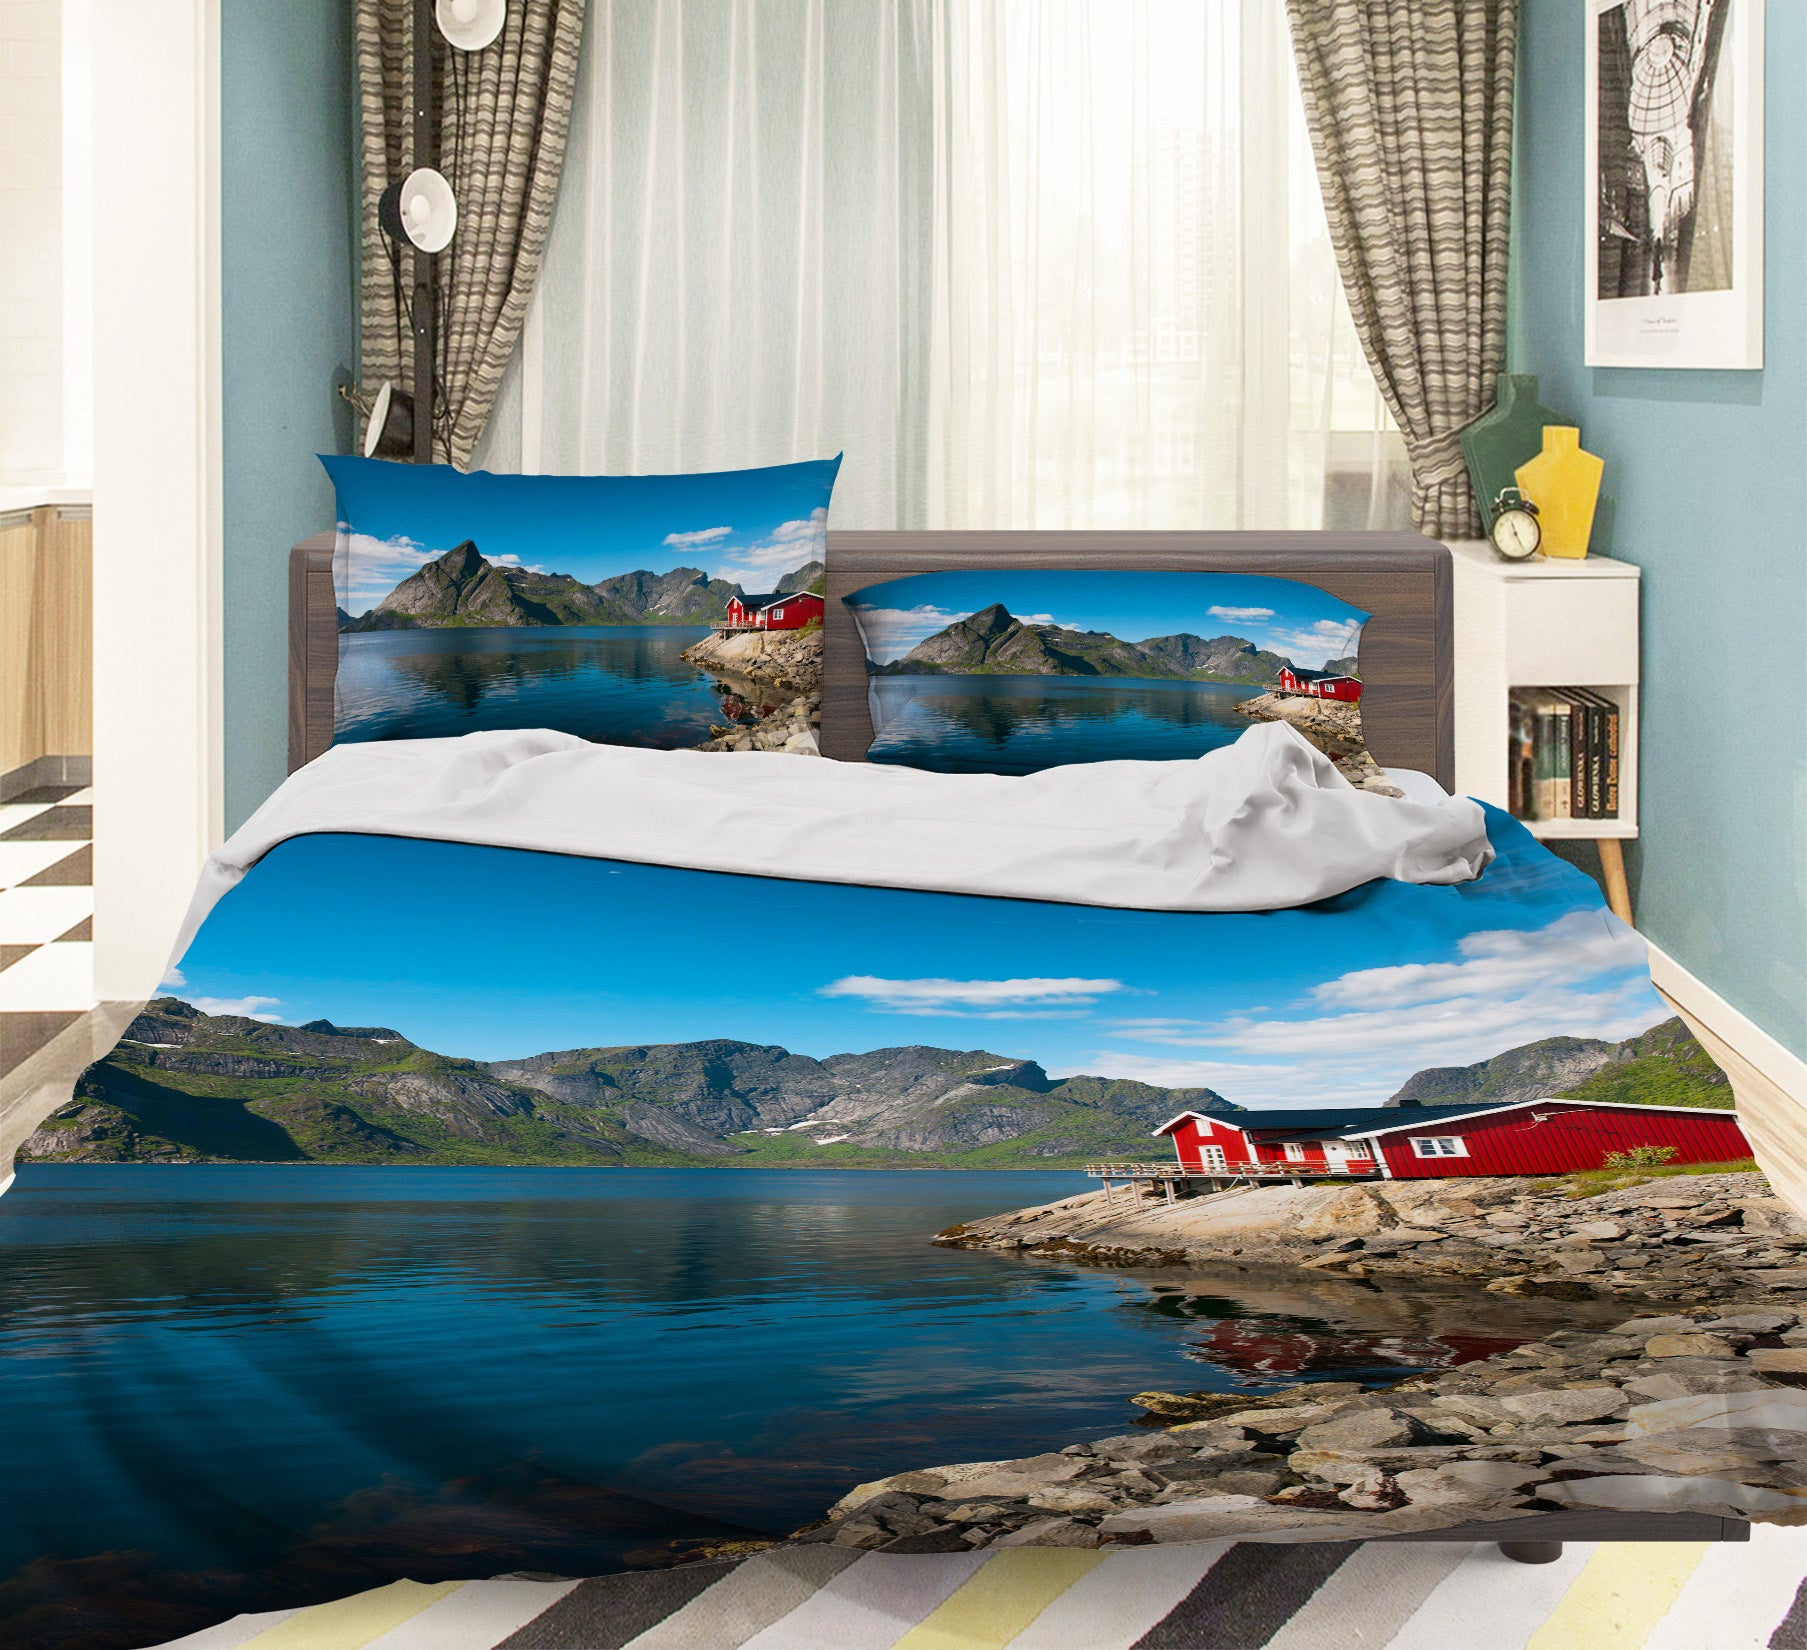 3D Lakeside Red Houses 8590 Assaf Frank Bedding Bed Pillowcases Quilt